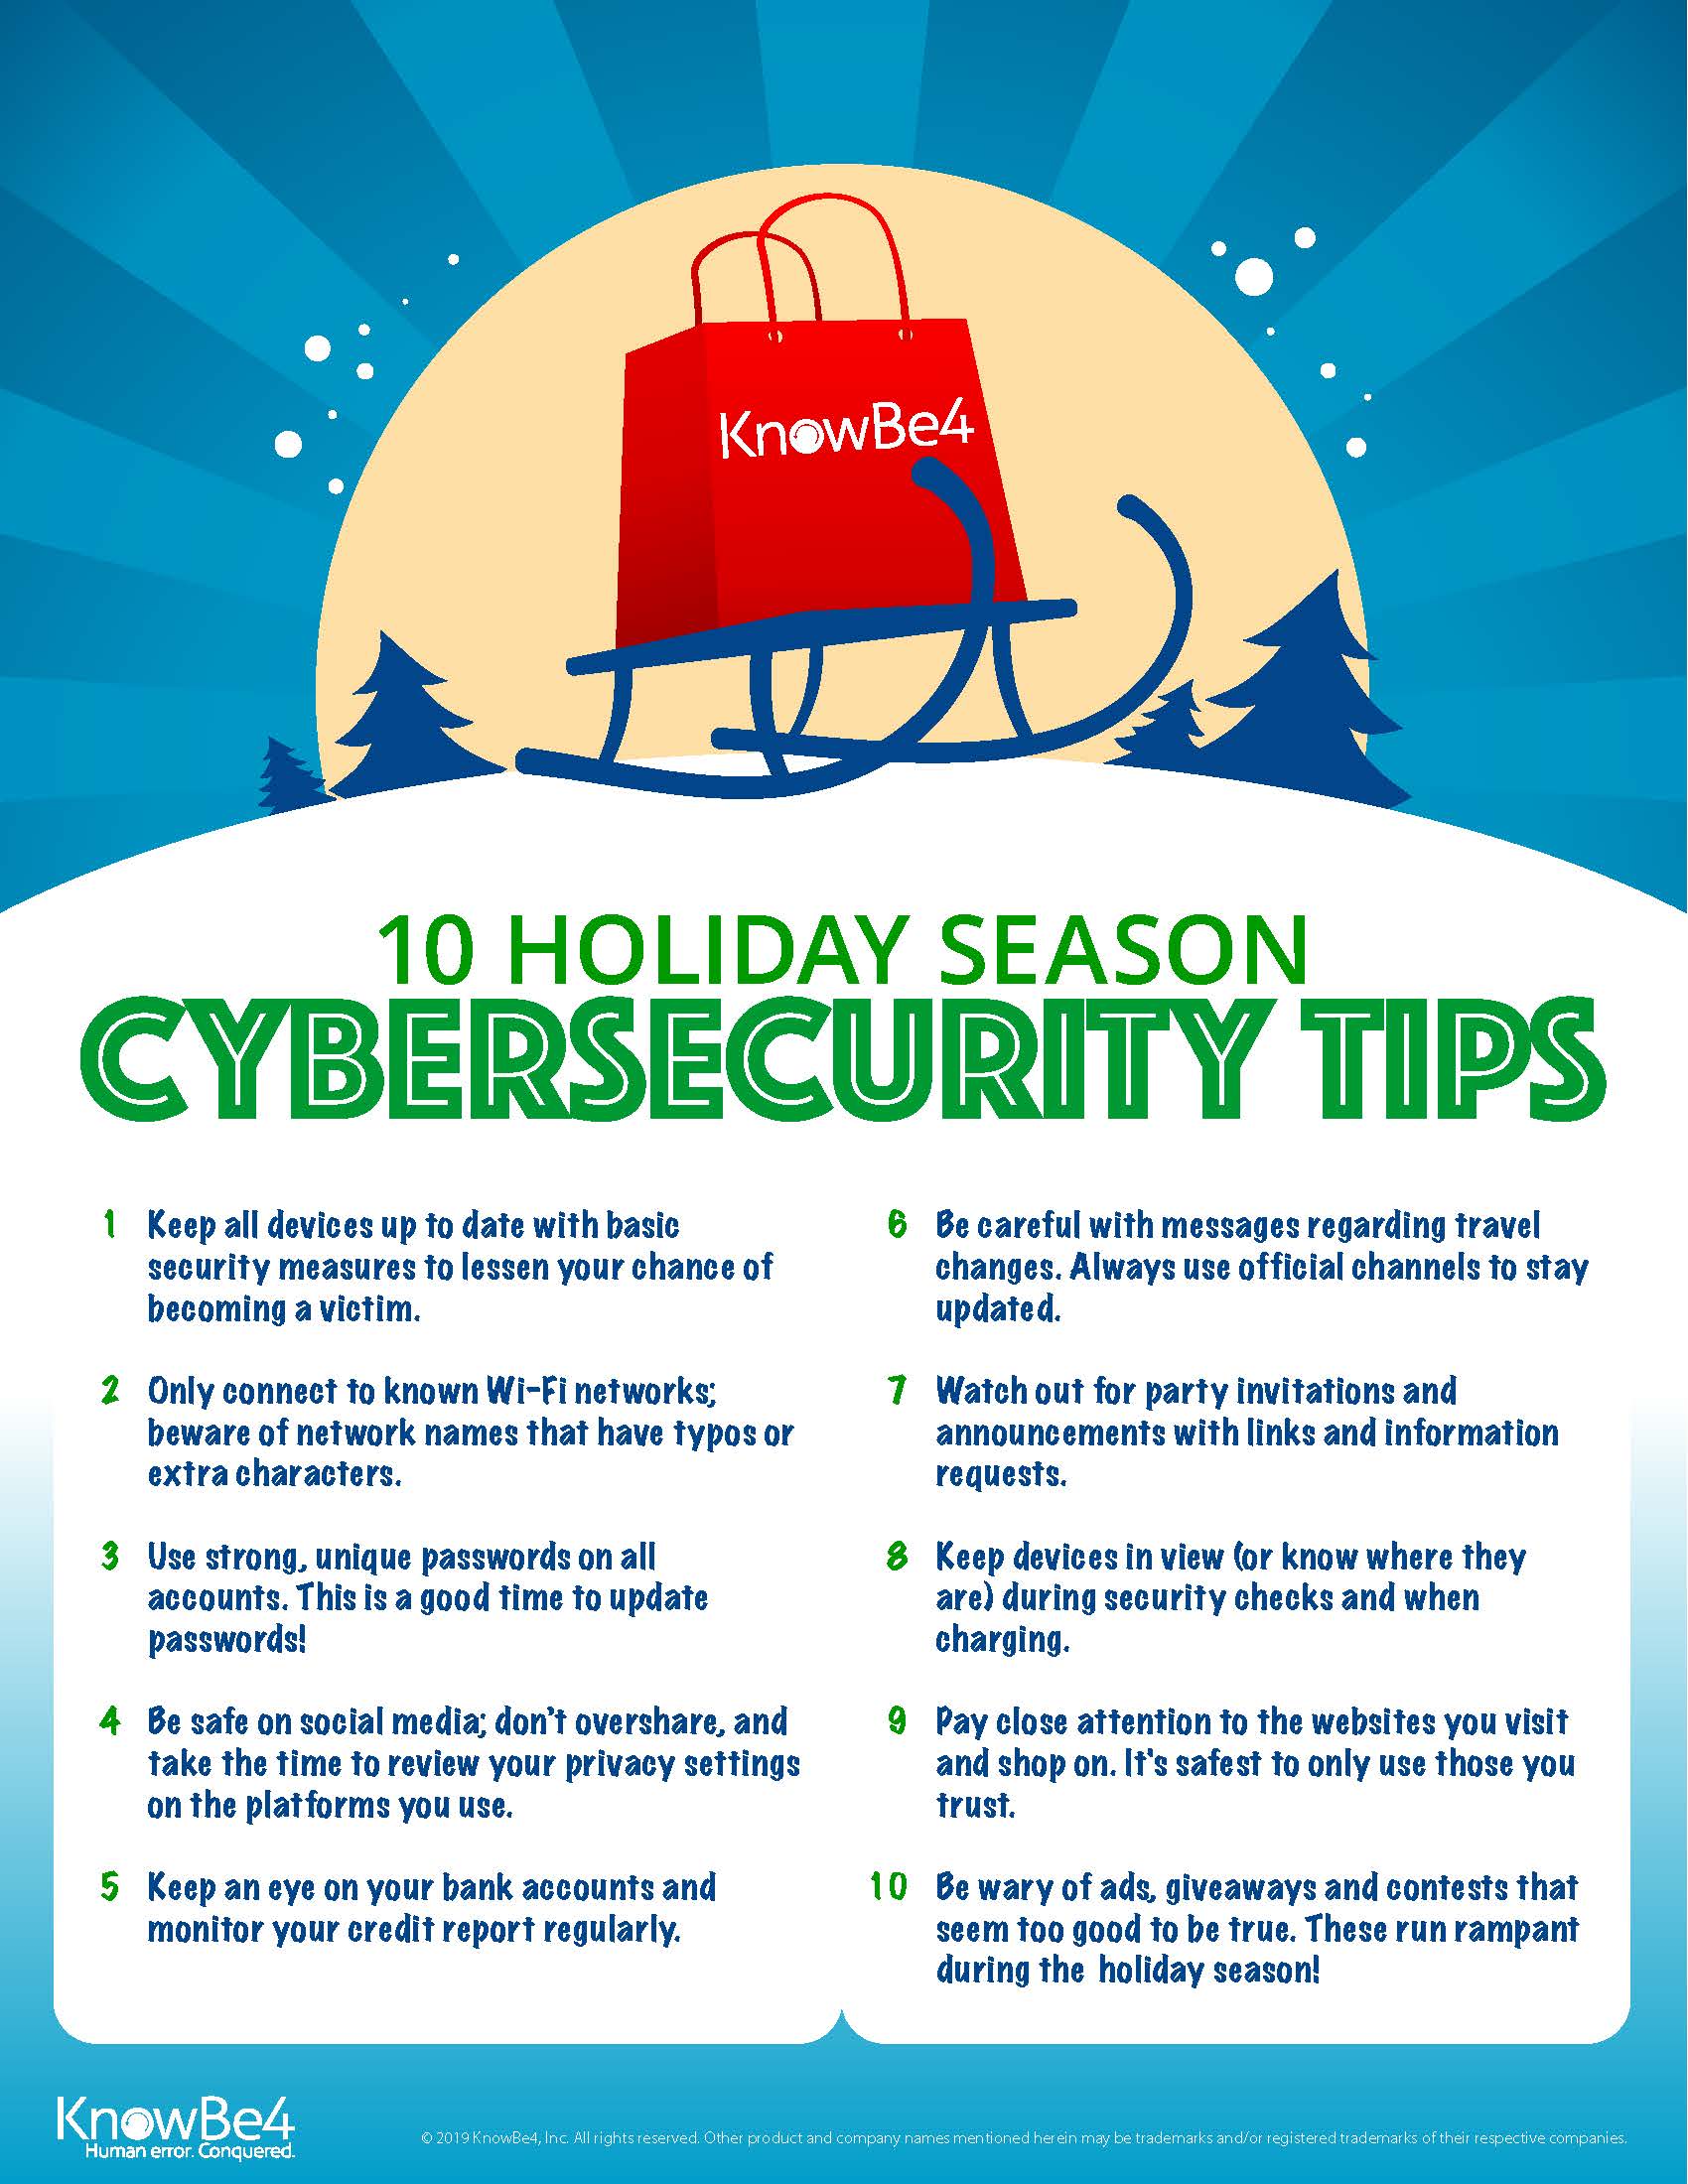 Cybersecurity tips for Holidays